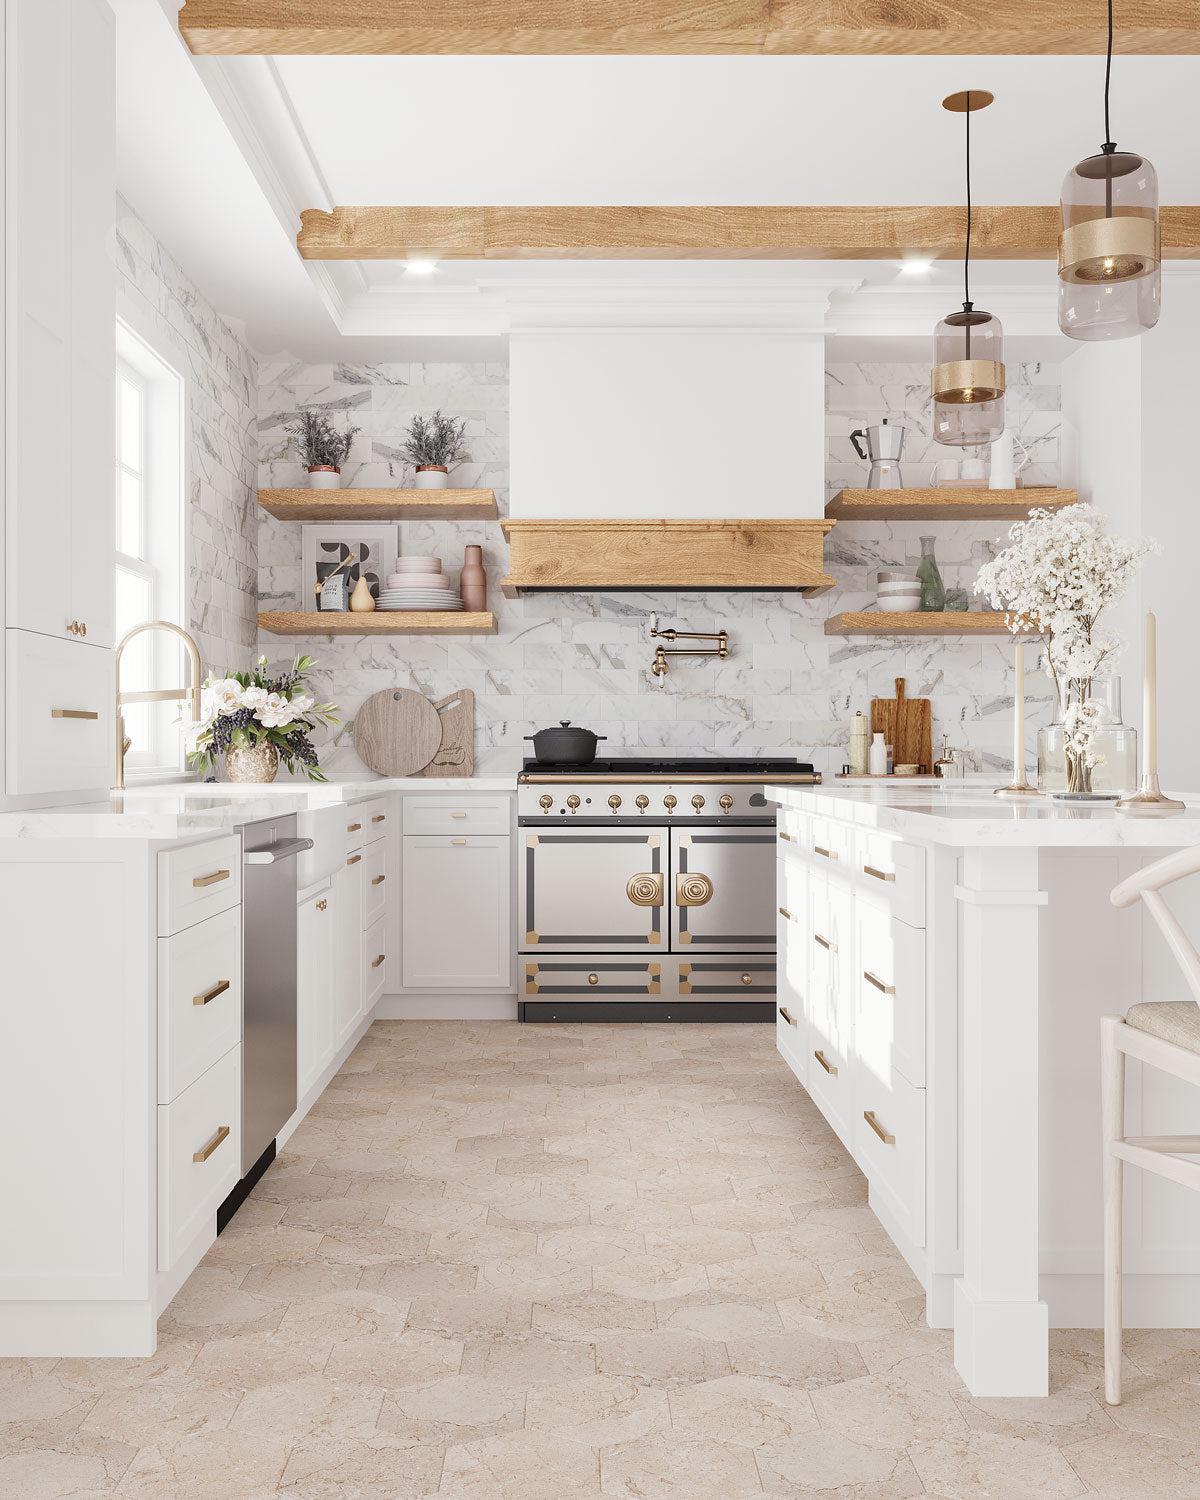 White and Wood kitchen with open shelves and Crema Marfil hexagon floor tiles